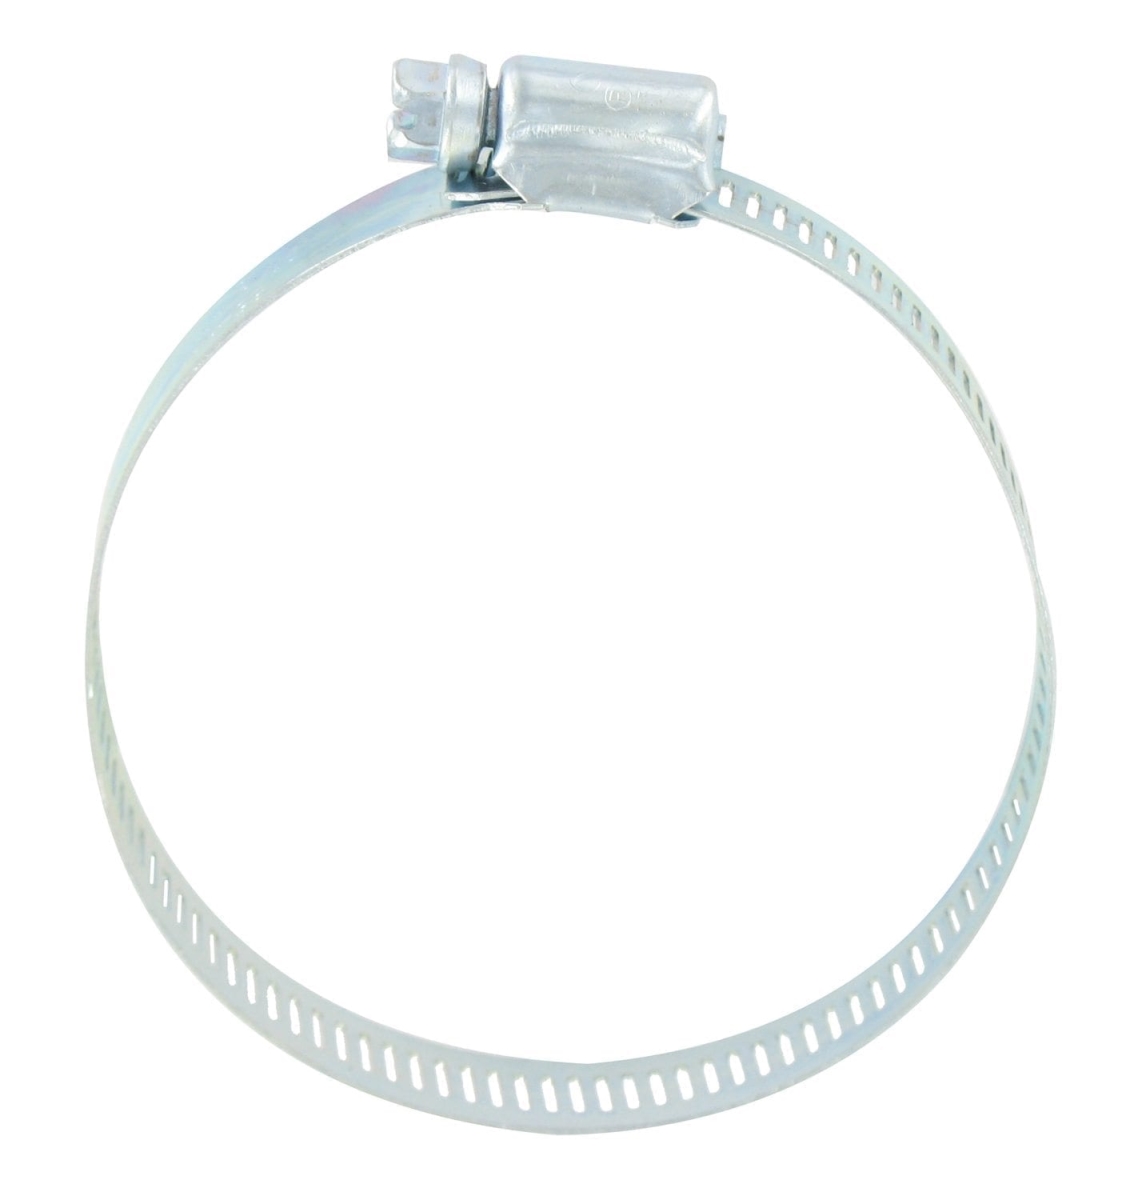 Hose Clamp #48, Ss, 2-1/2In X 3-1/2In, Bagged